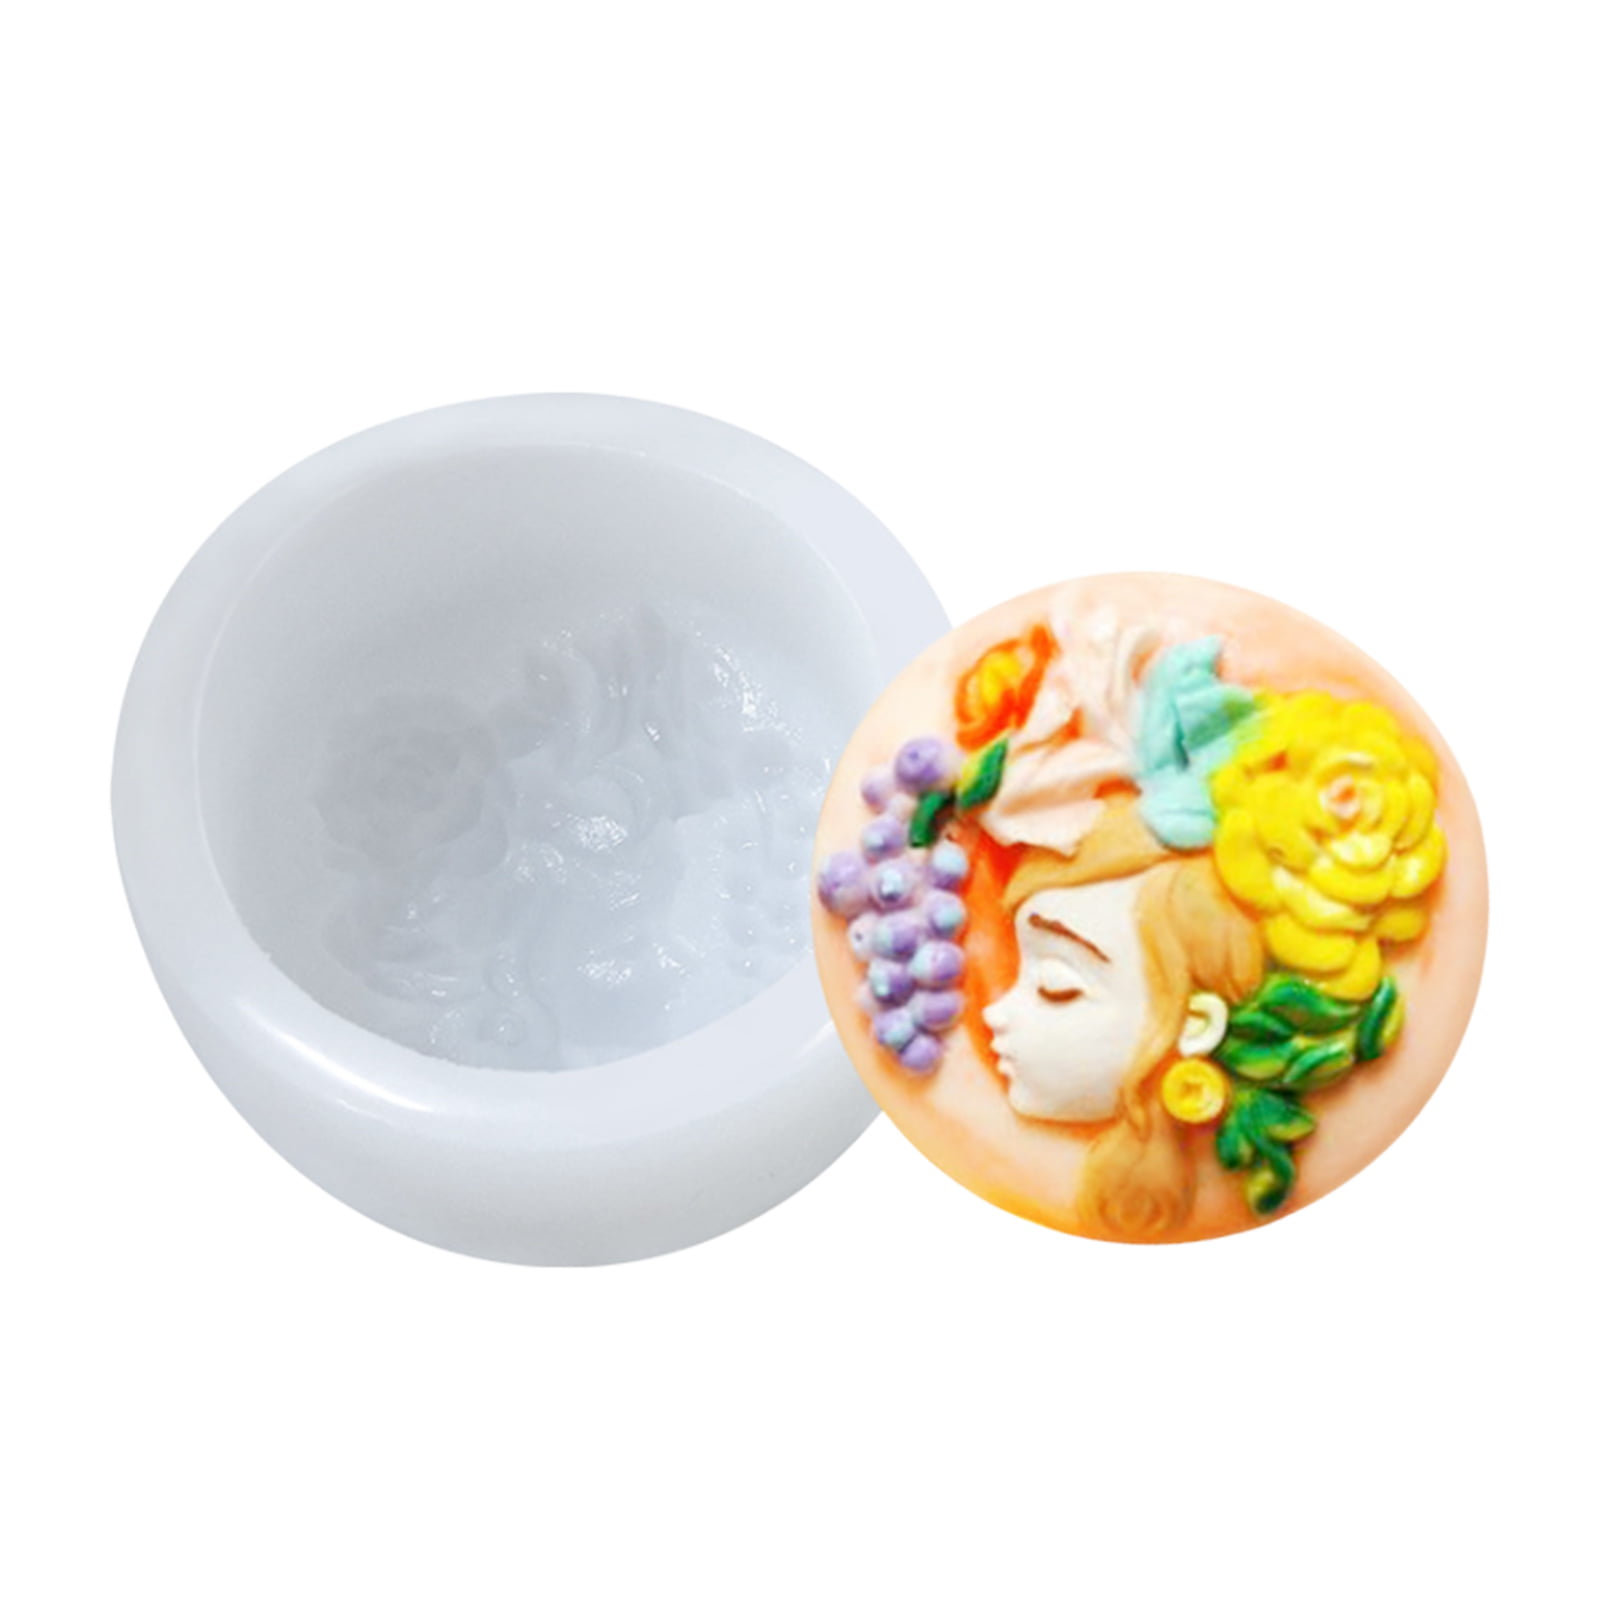 Silicon Mould for Plaster Craft Soap Making Happy tree pattern round soap mold